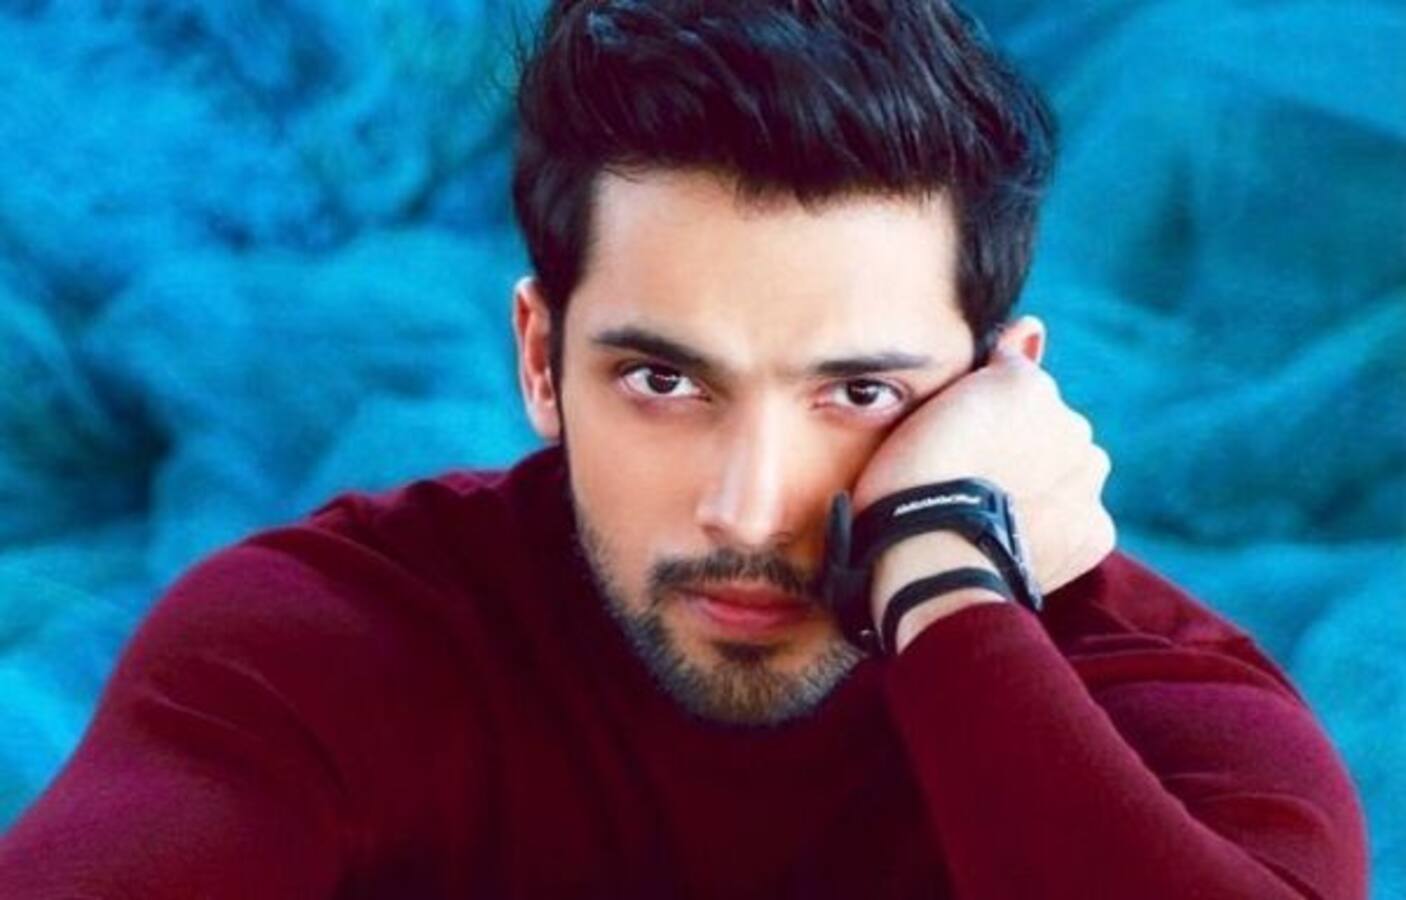 Kaisi Yeh Yaariyan 3 actor Parth Samthaan requests fans to not interfere in his personal life